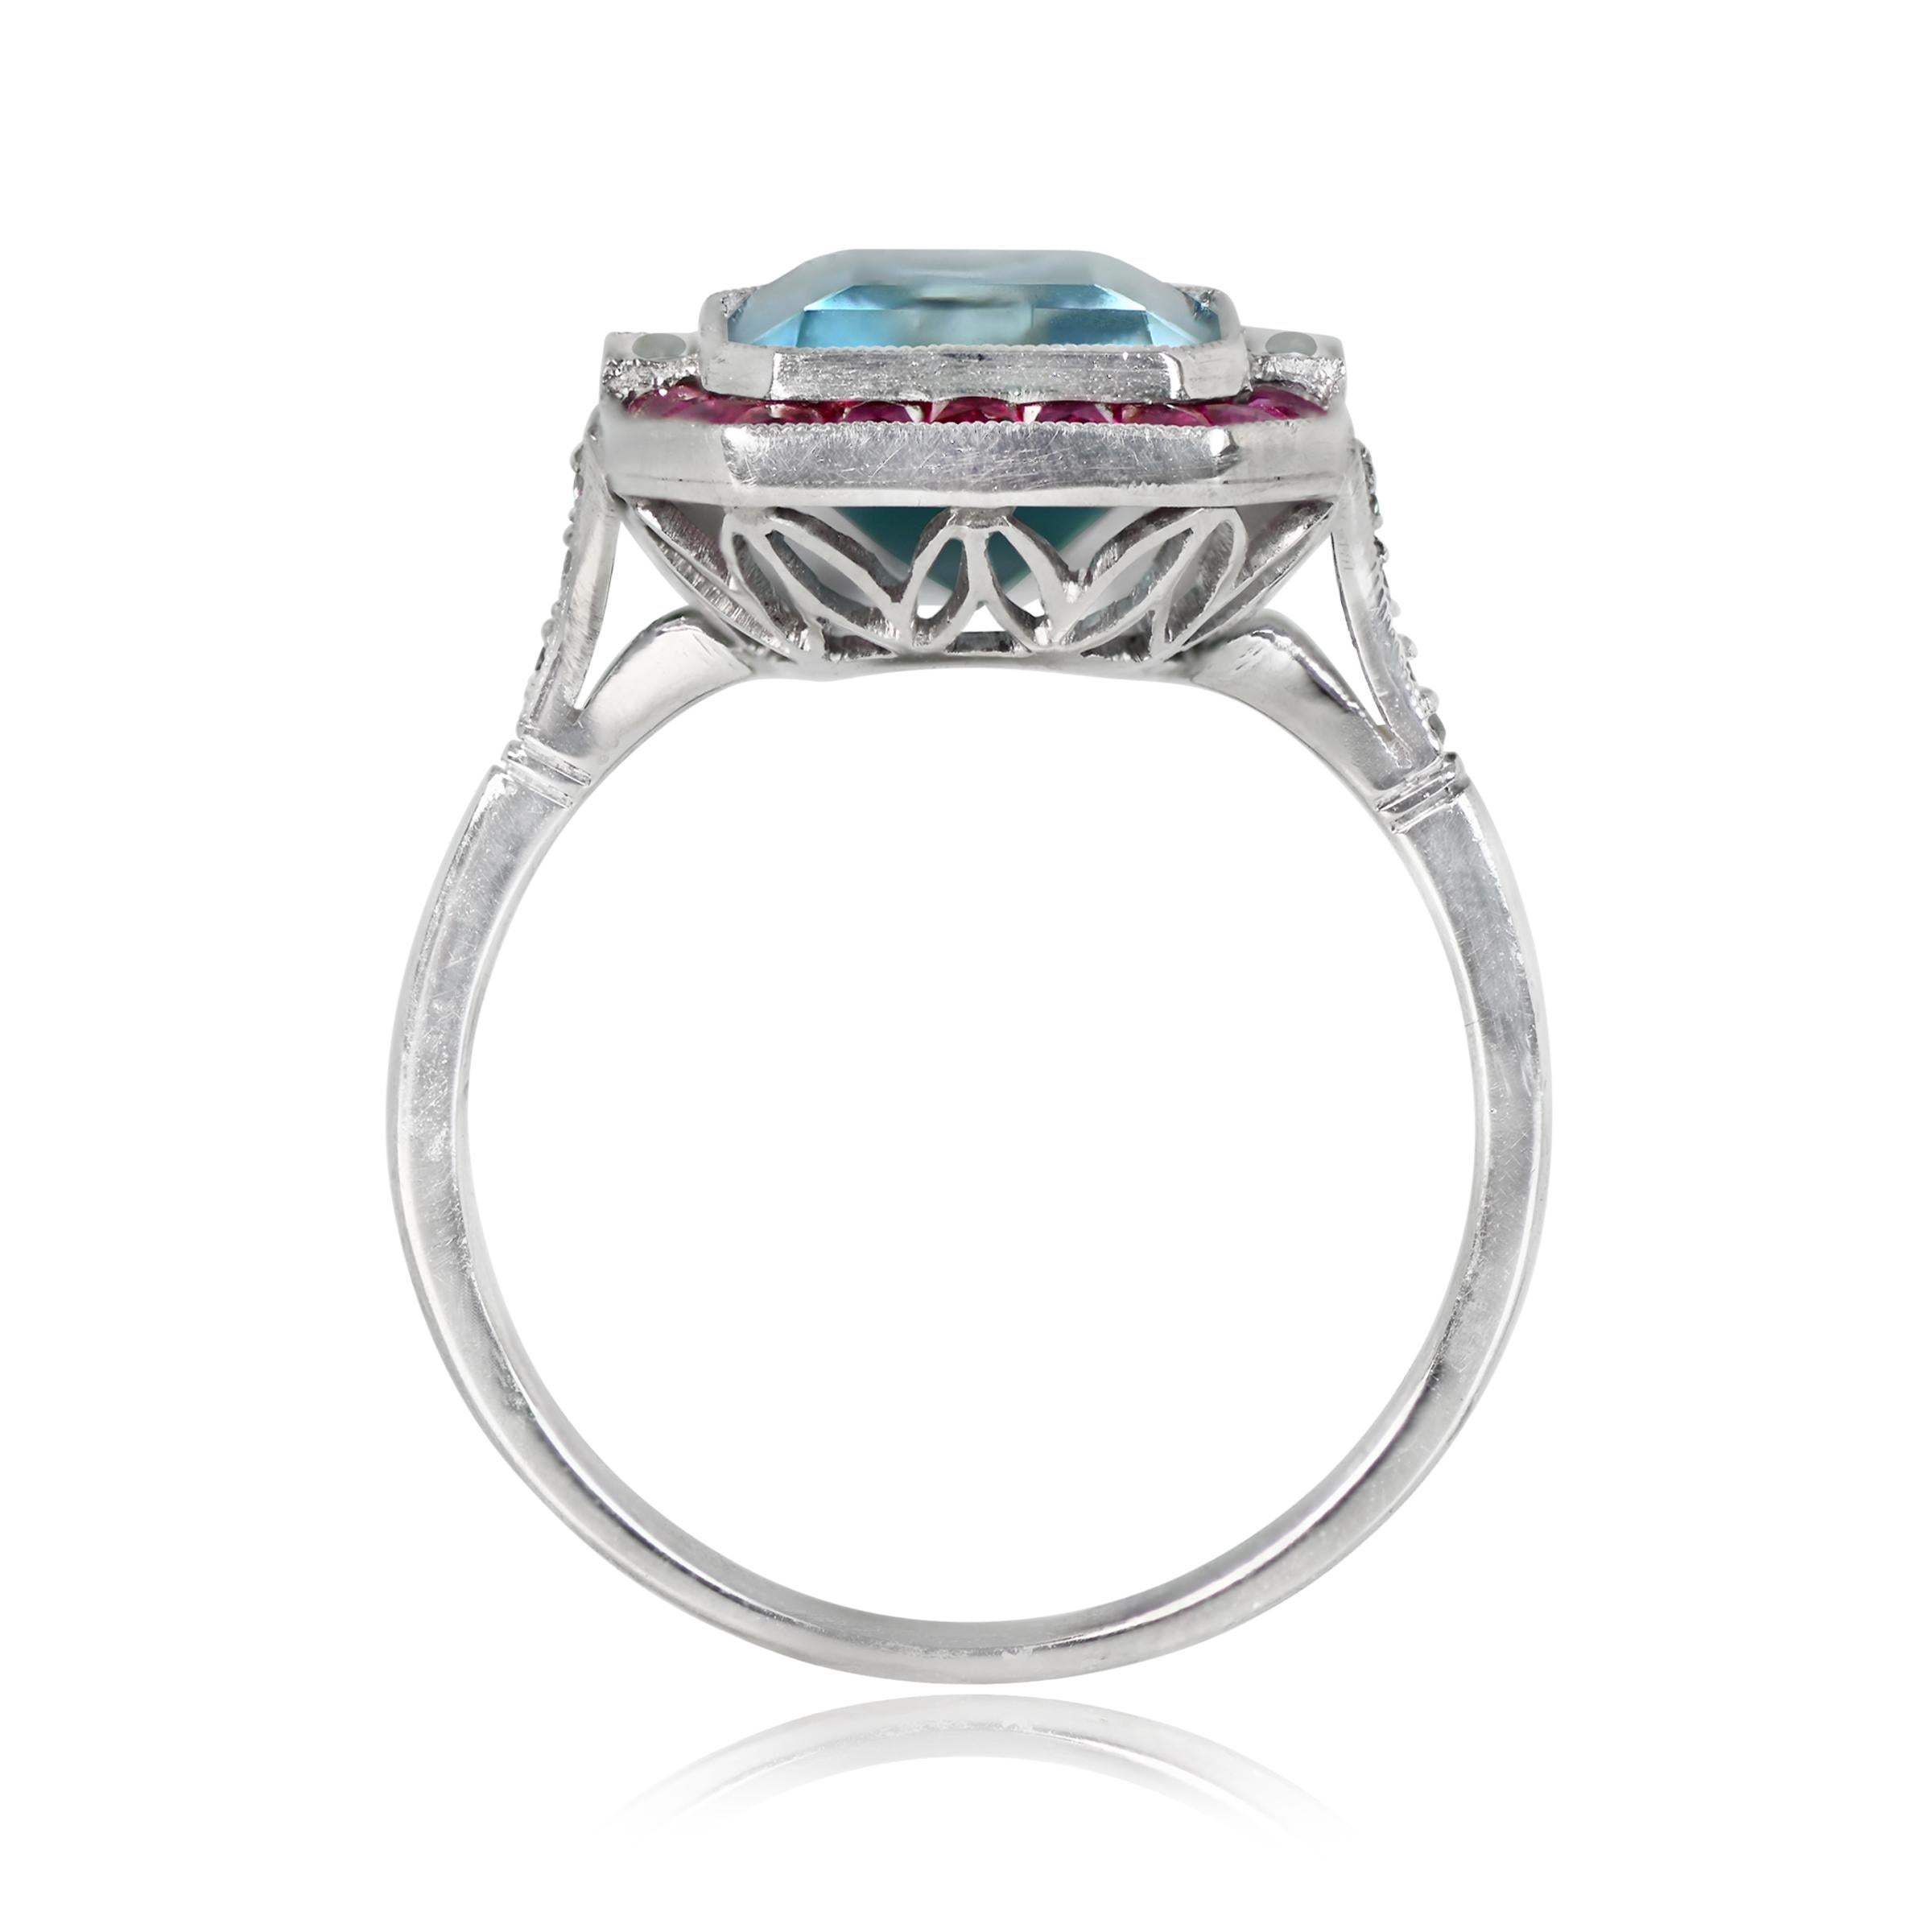 3.25ct Emerald Cut Aquamarine Cocktail Ring, Ruby Halo, Platinum In Excellent Condition For Sale In New York, NY